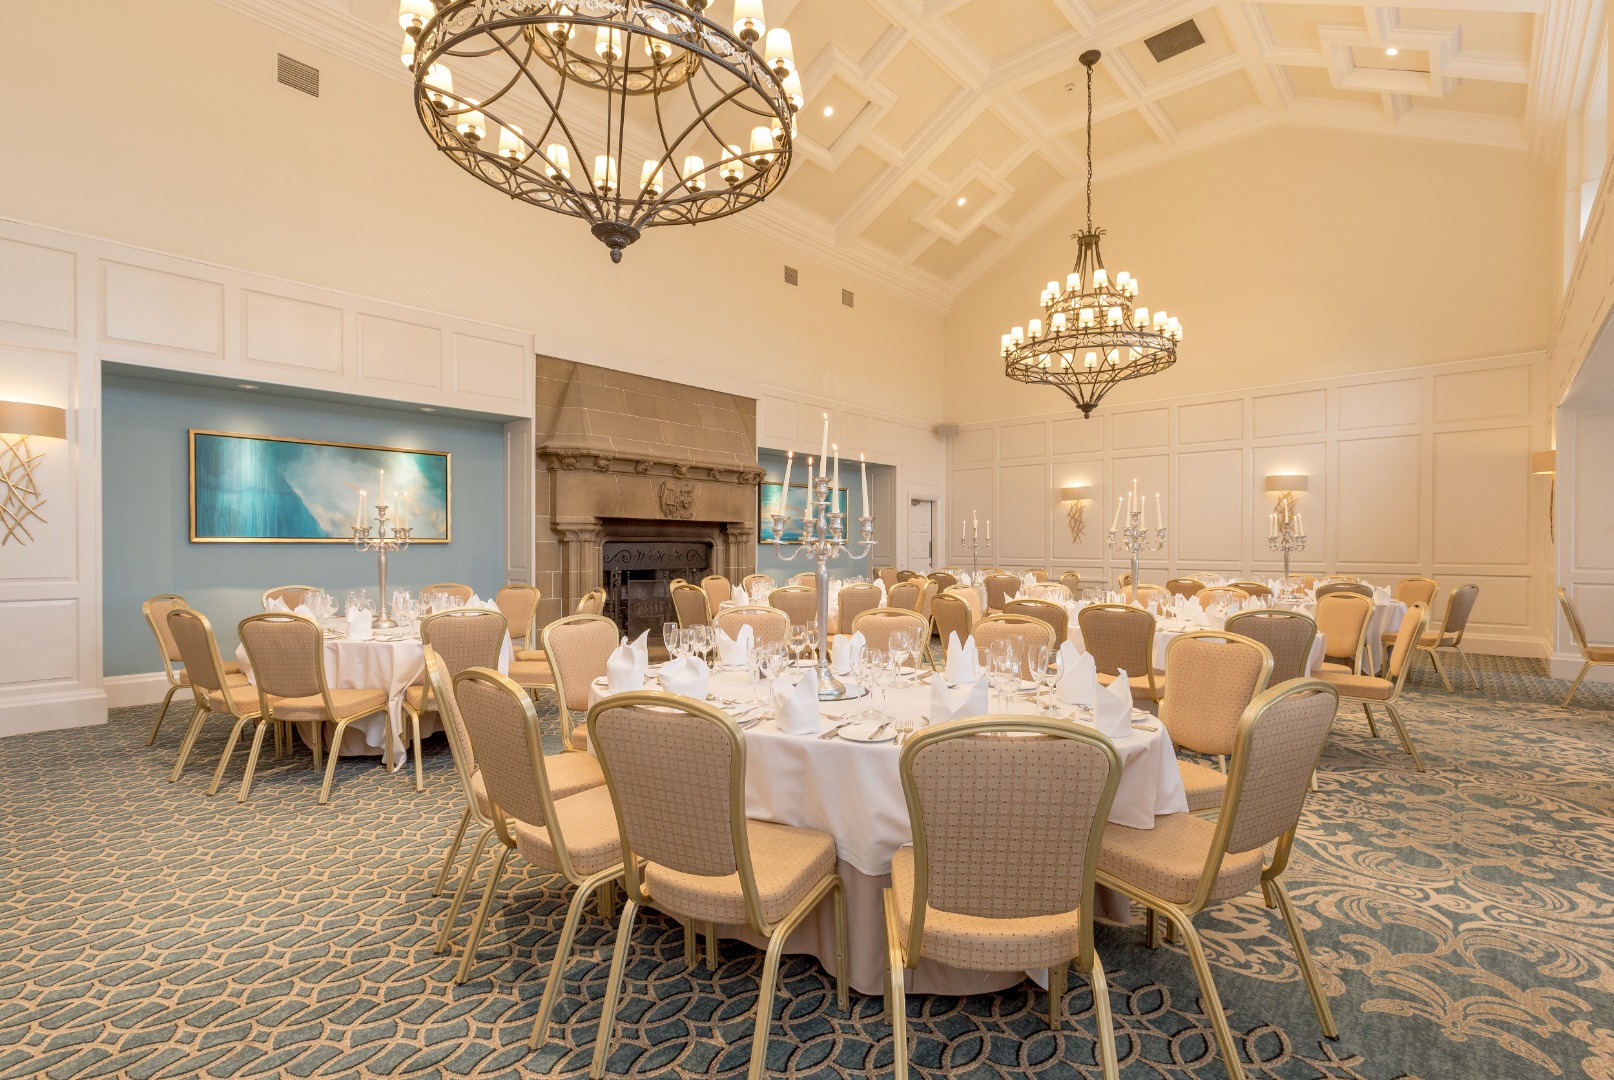 Our Cathedral Ballroom offers the perfect space for a Prom